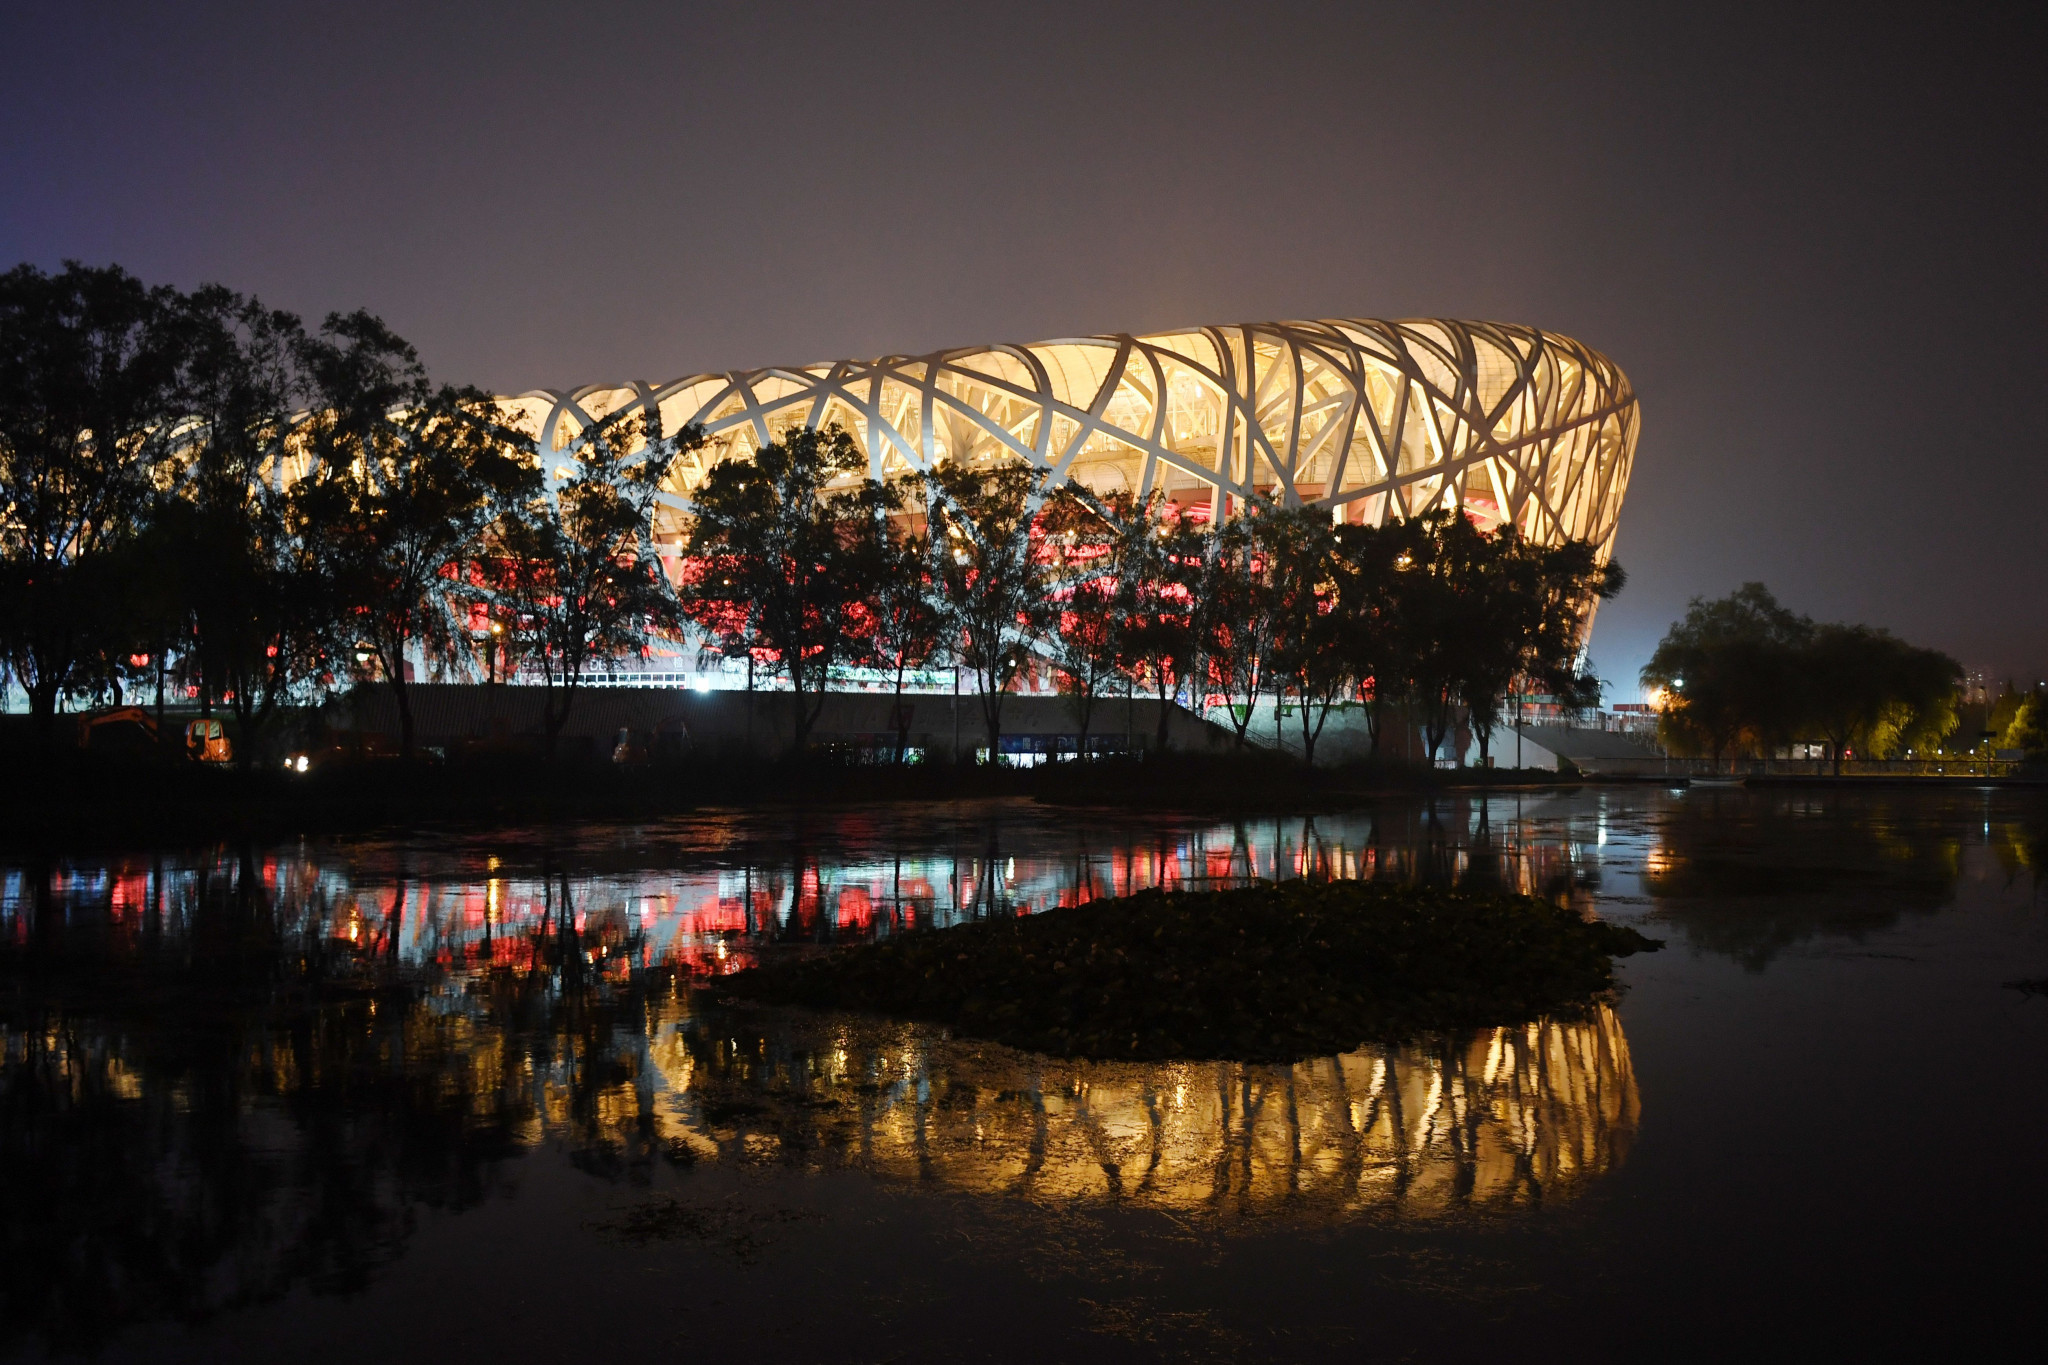 Beijing 2022 make public call for Opening Ceremony ideas